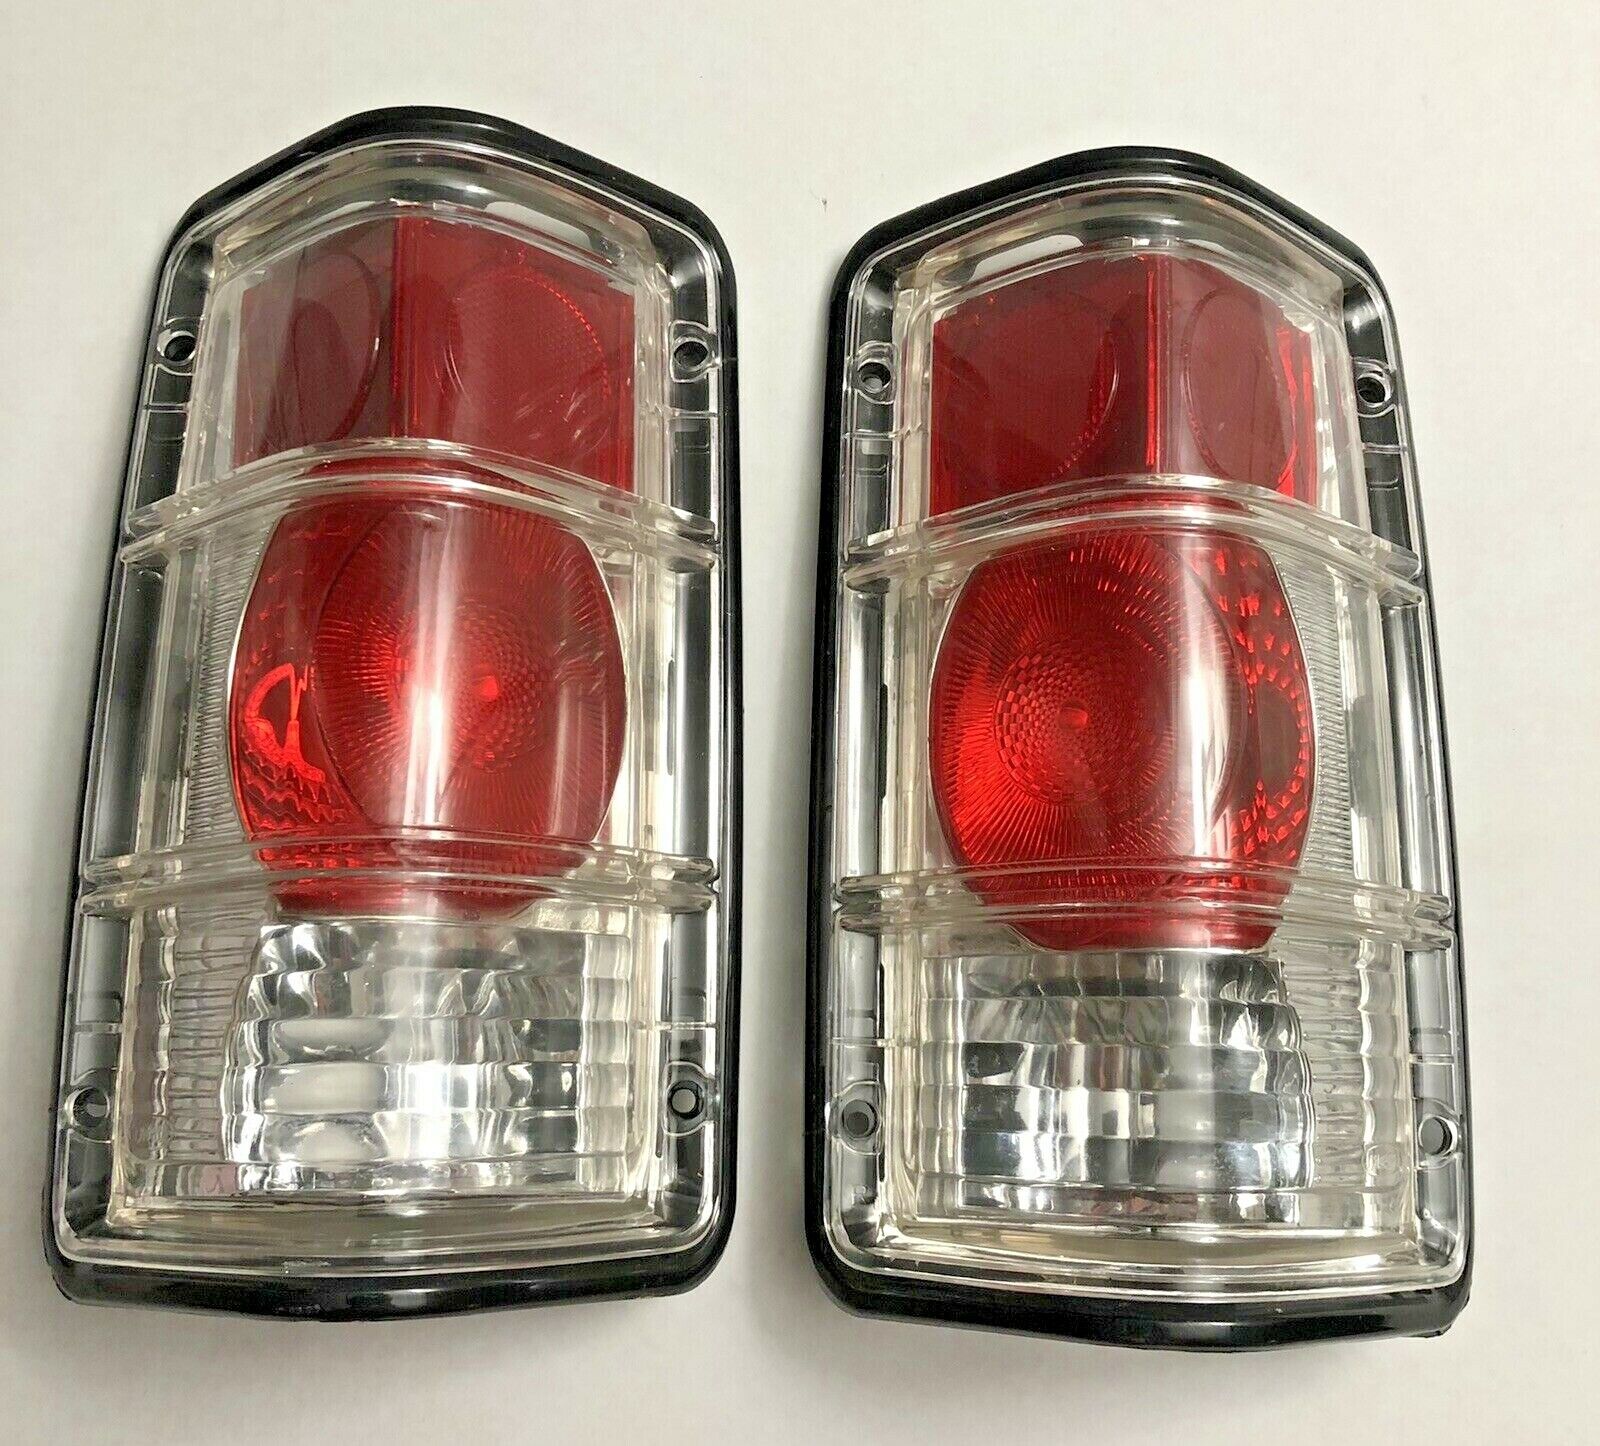 81-93 DODGE RAM PU TAIL LIGHTS SET OF 2 CLEAR WITH BLACK TRIM 81/93 RAM CHARGER